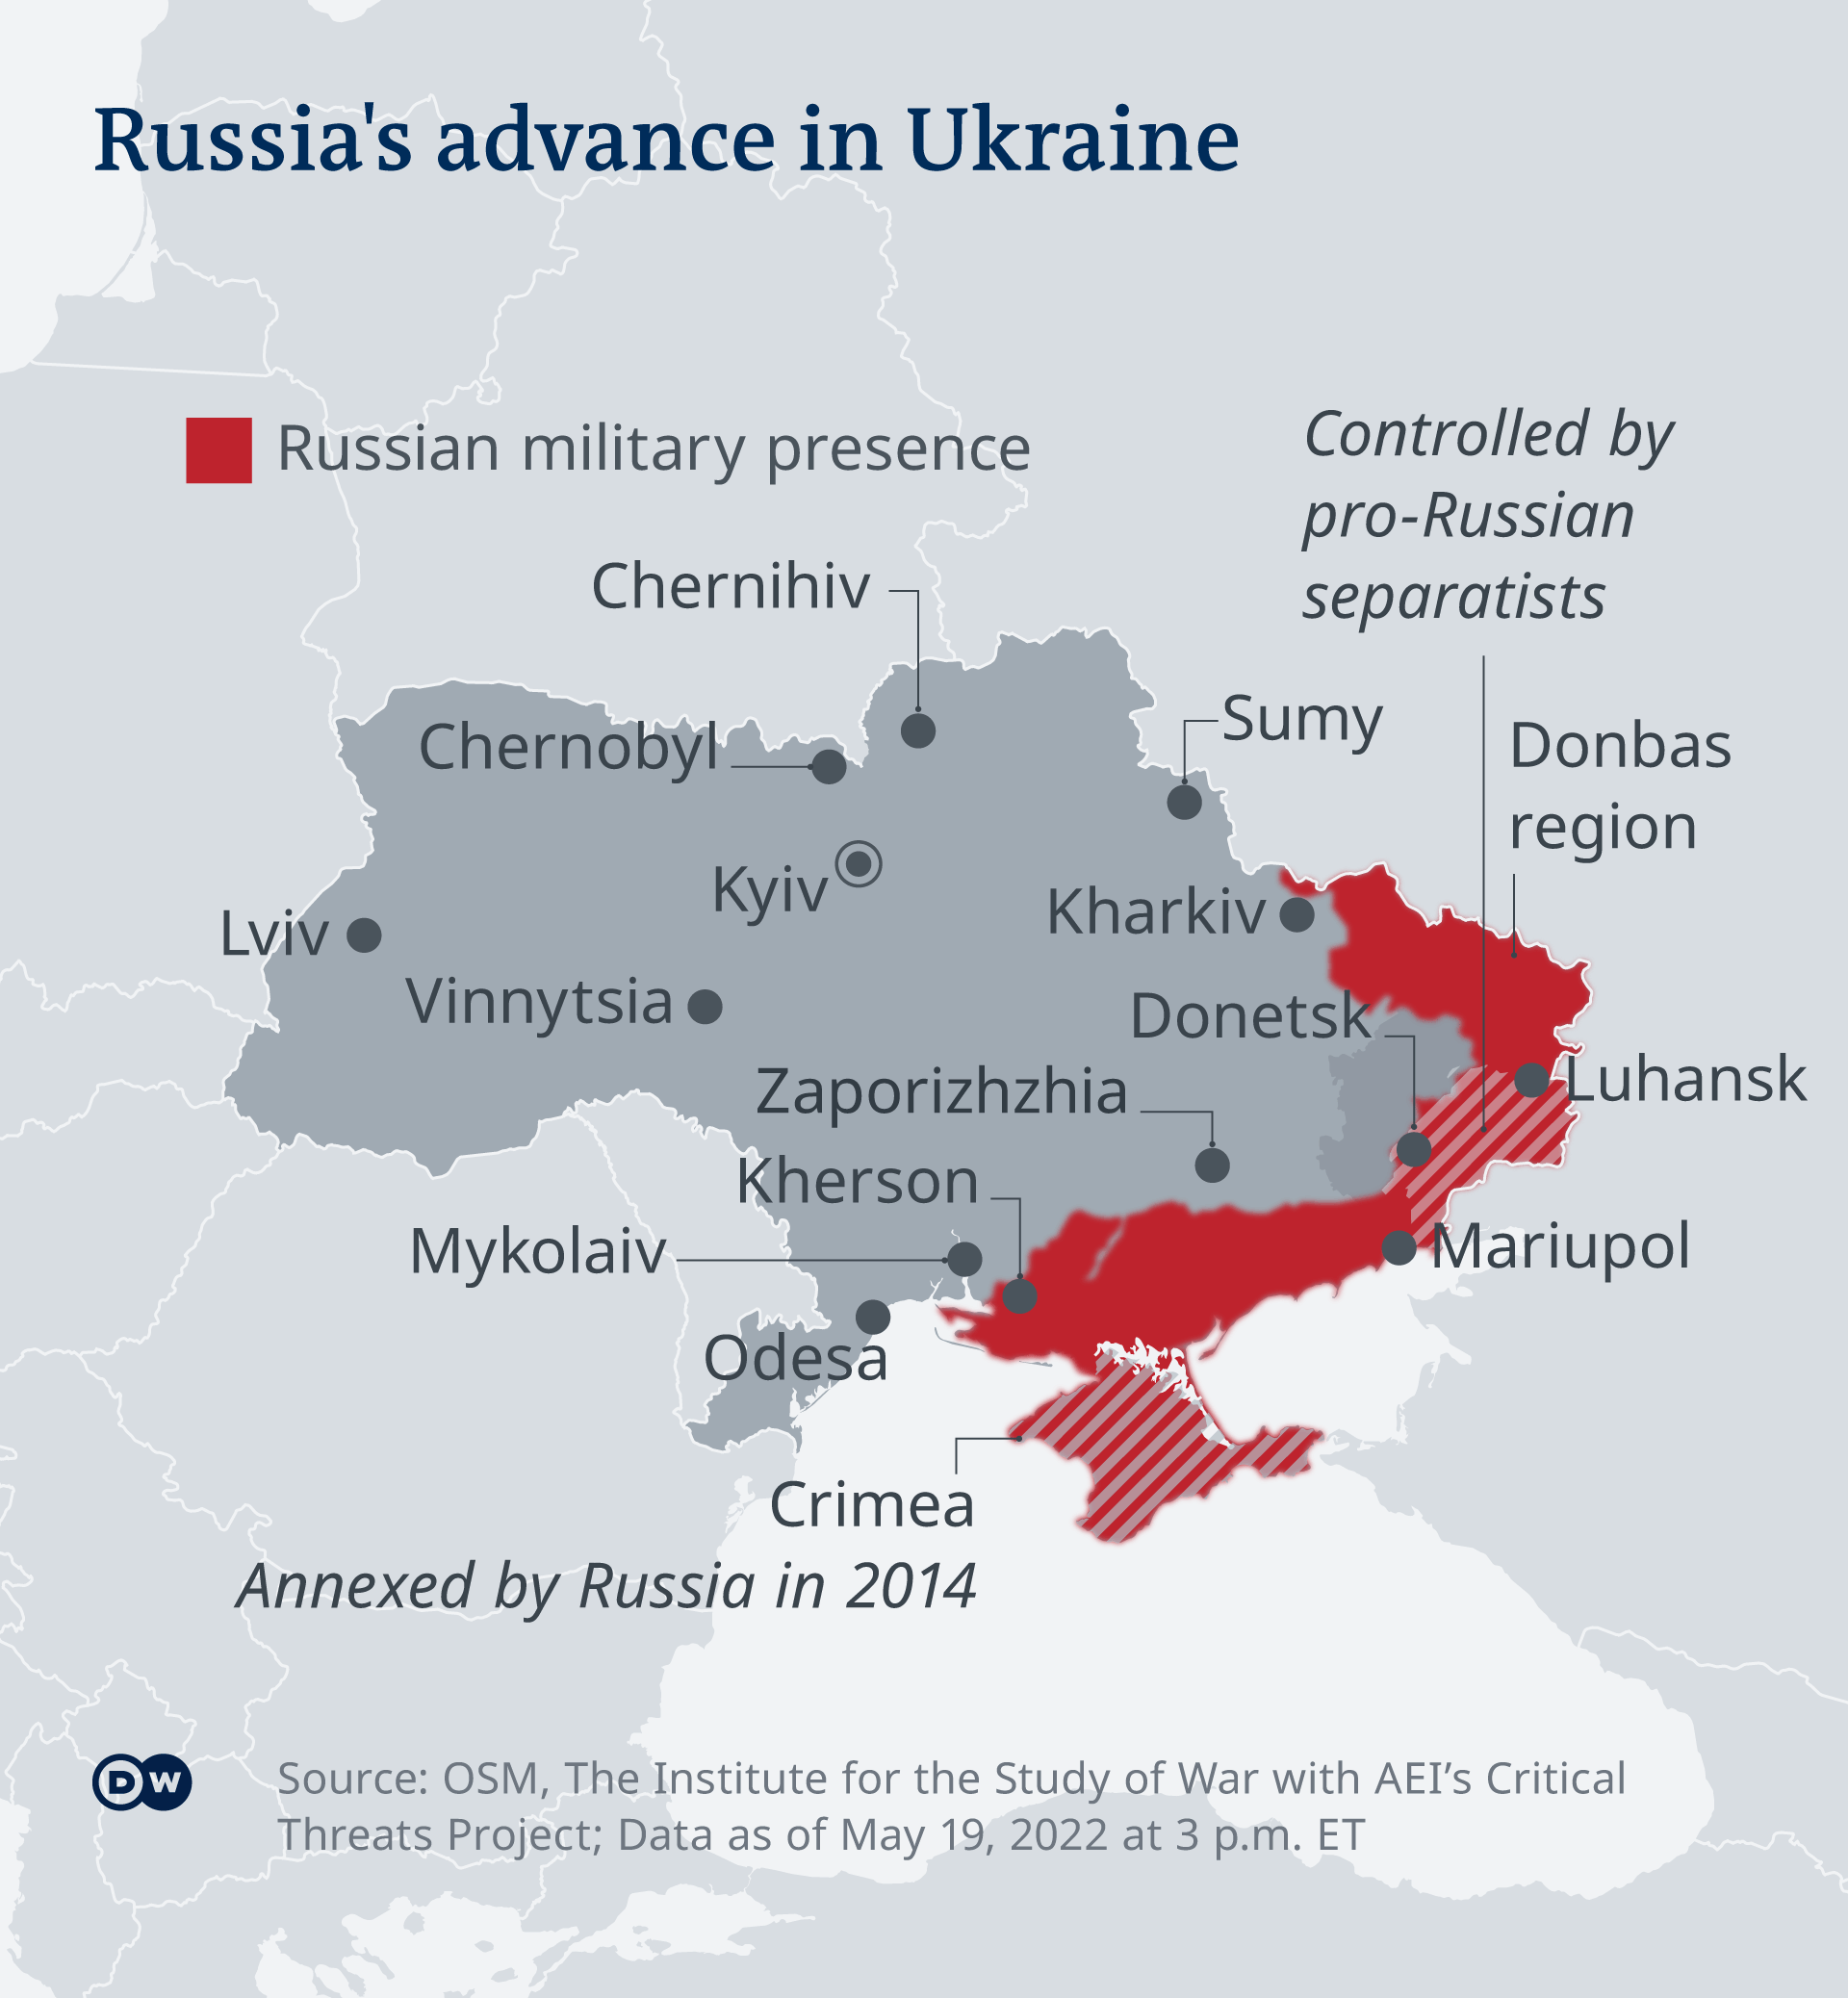 Map showing the parts of Ukraine under control by Russian troops